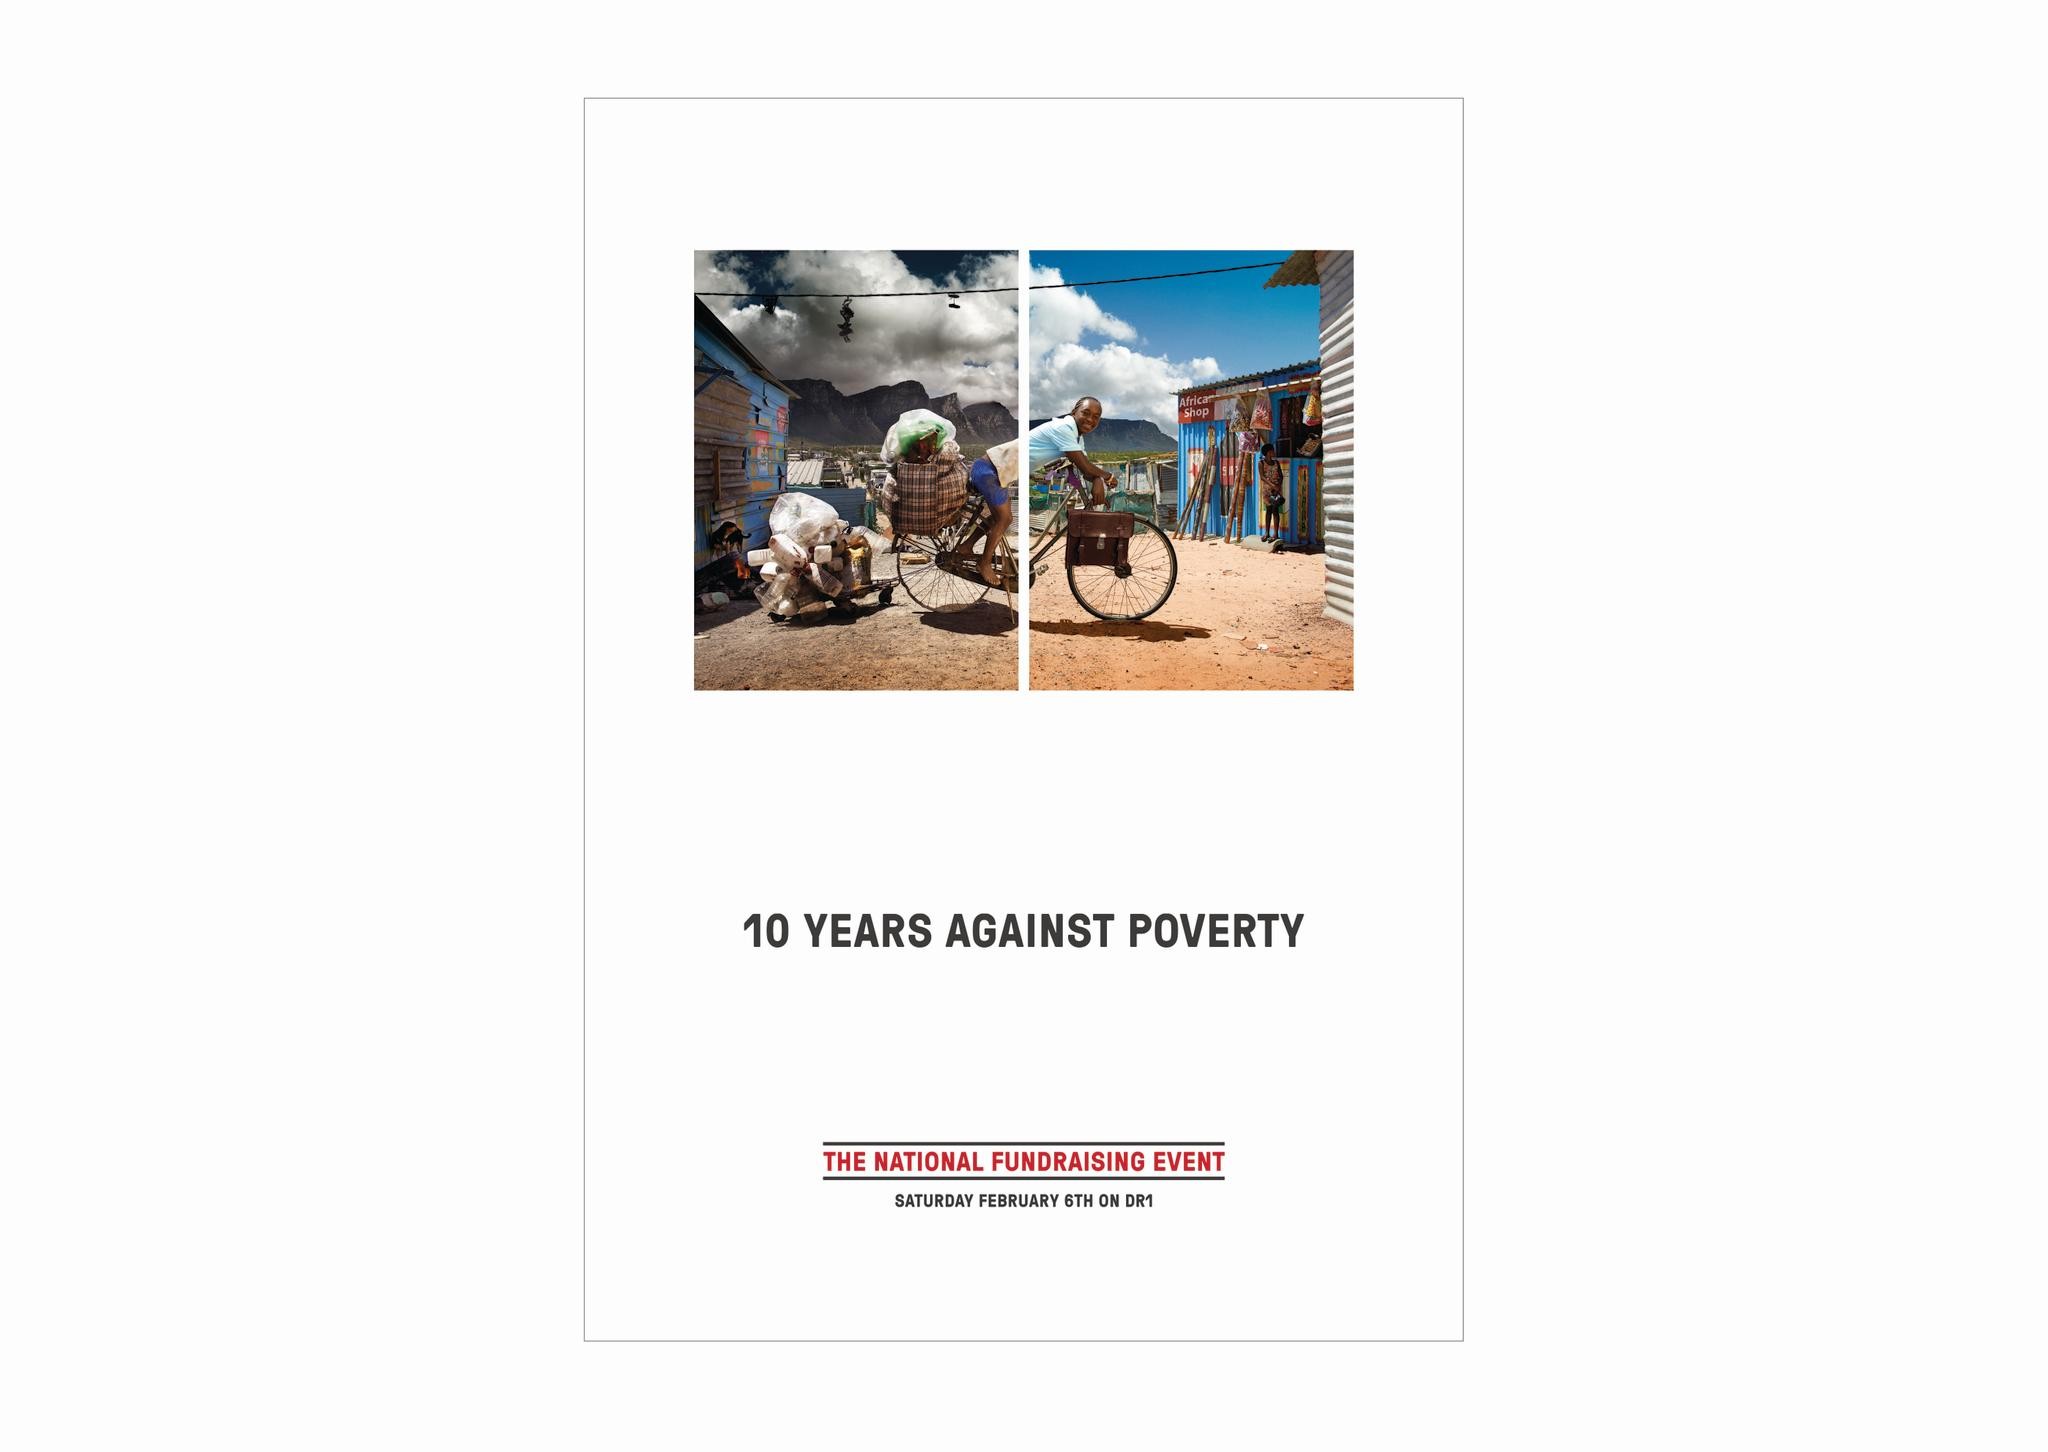 10 years against poverty